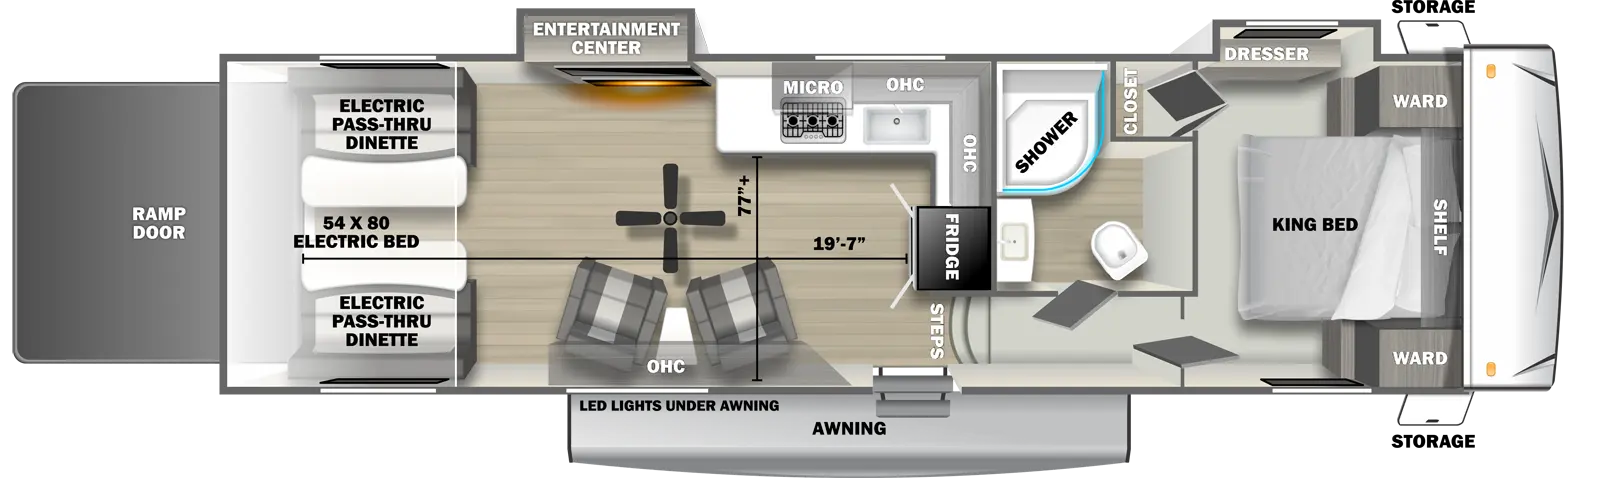 The 3300RLT fifth wheel has 2 slide outs on the off-door side, 1 entry door and 1 rear ramp door. Exterior features include an awning with LED lights and front opposing side storage access. Interior layout from front to back includes front bedroom with foot-facing King bed, shelf over the bed, front corner wardrobes, front facing closet and off-door side slideout holding a dresser; off-door side bathroom with radius shower, toilet and single sink vanity; 3 steps down into the kitchen area with off-door side L-shaped countertop, stovetop, L-Shaped overhead cabinets, sink and rear facing refrigerator; 2 door side recliners with end table; ceiling fan; off-door side slideout holding and entertainment center; and rear 54 x 80 electric bed over electric pass-through dinette. Cargo length from rear of unit to refrigerator is 19 ft. 7 in. Cargo width from countertop to door side wall is 77 inches.